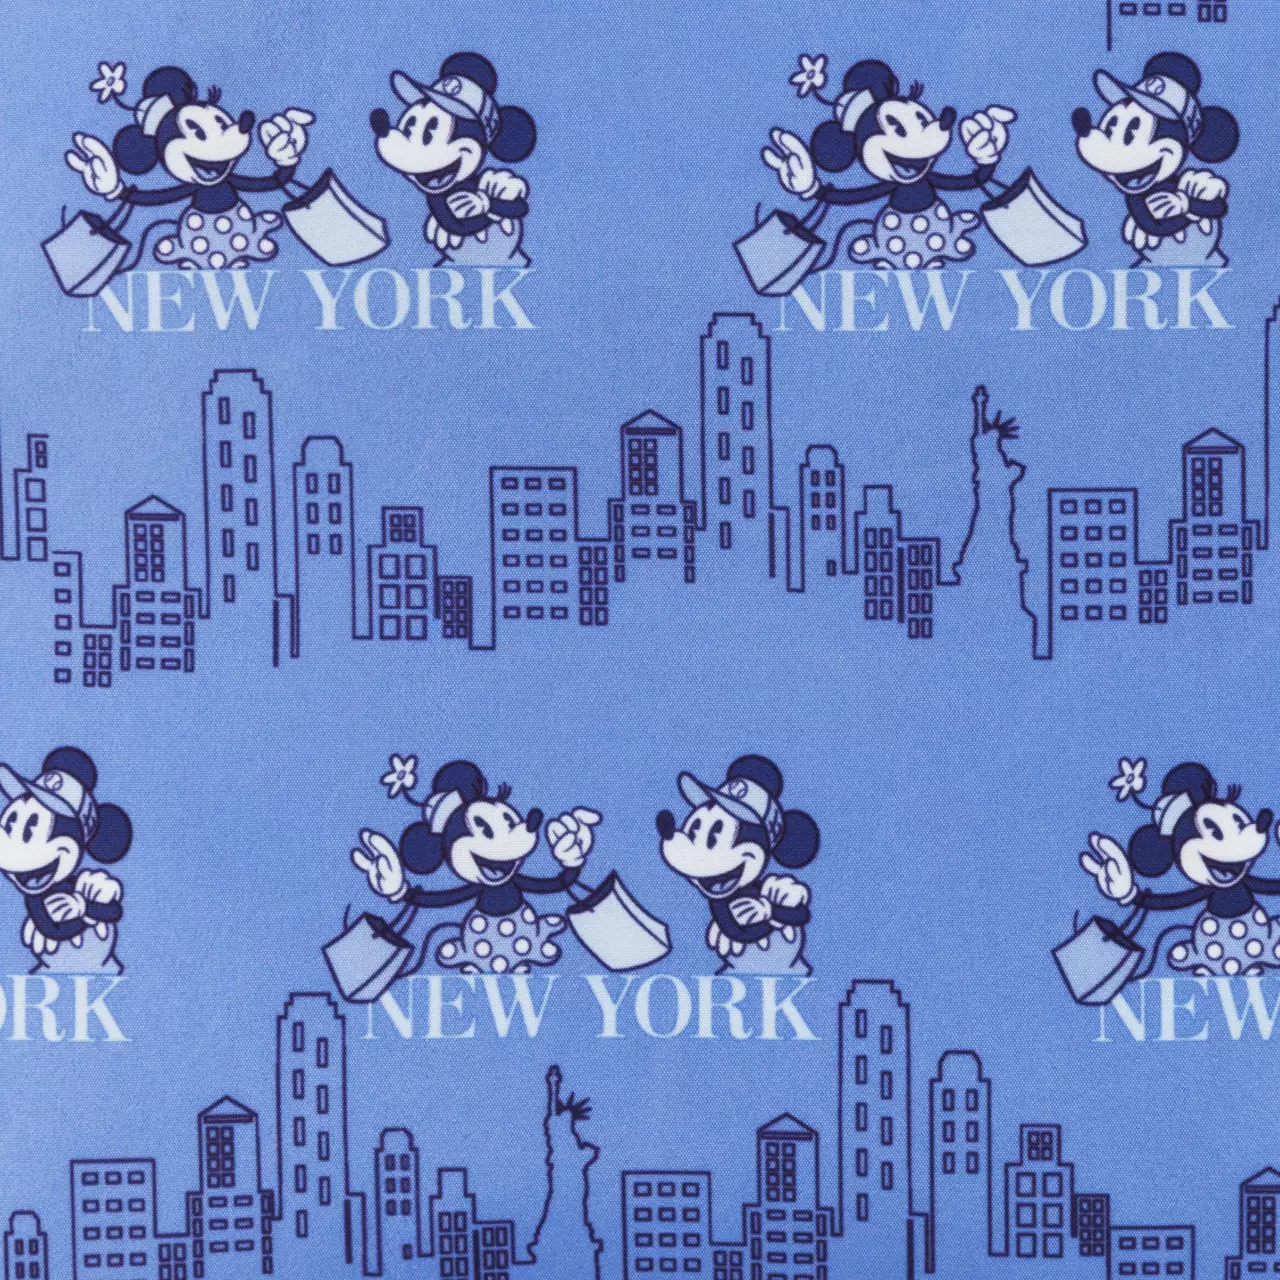 Disney Store in Times Square Mickey and Minnie New York print